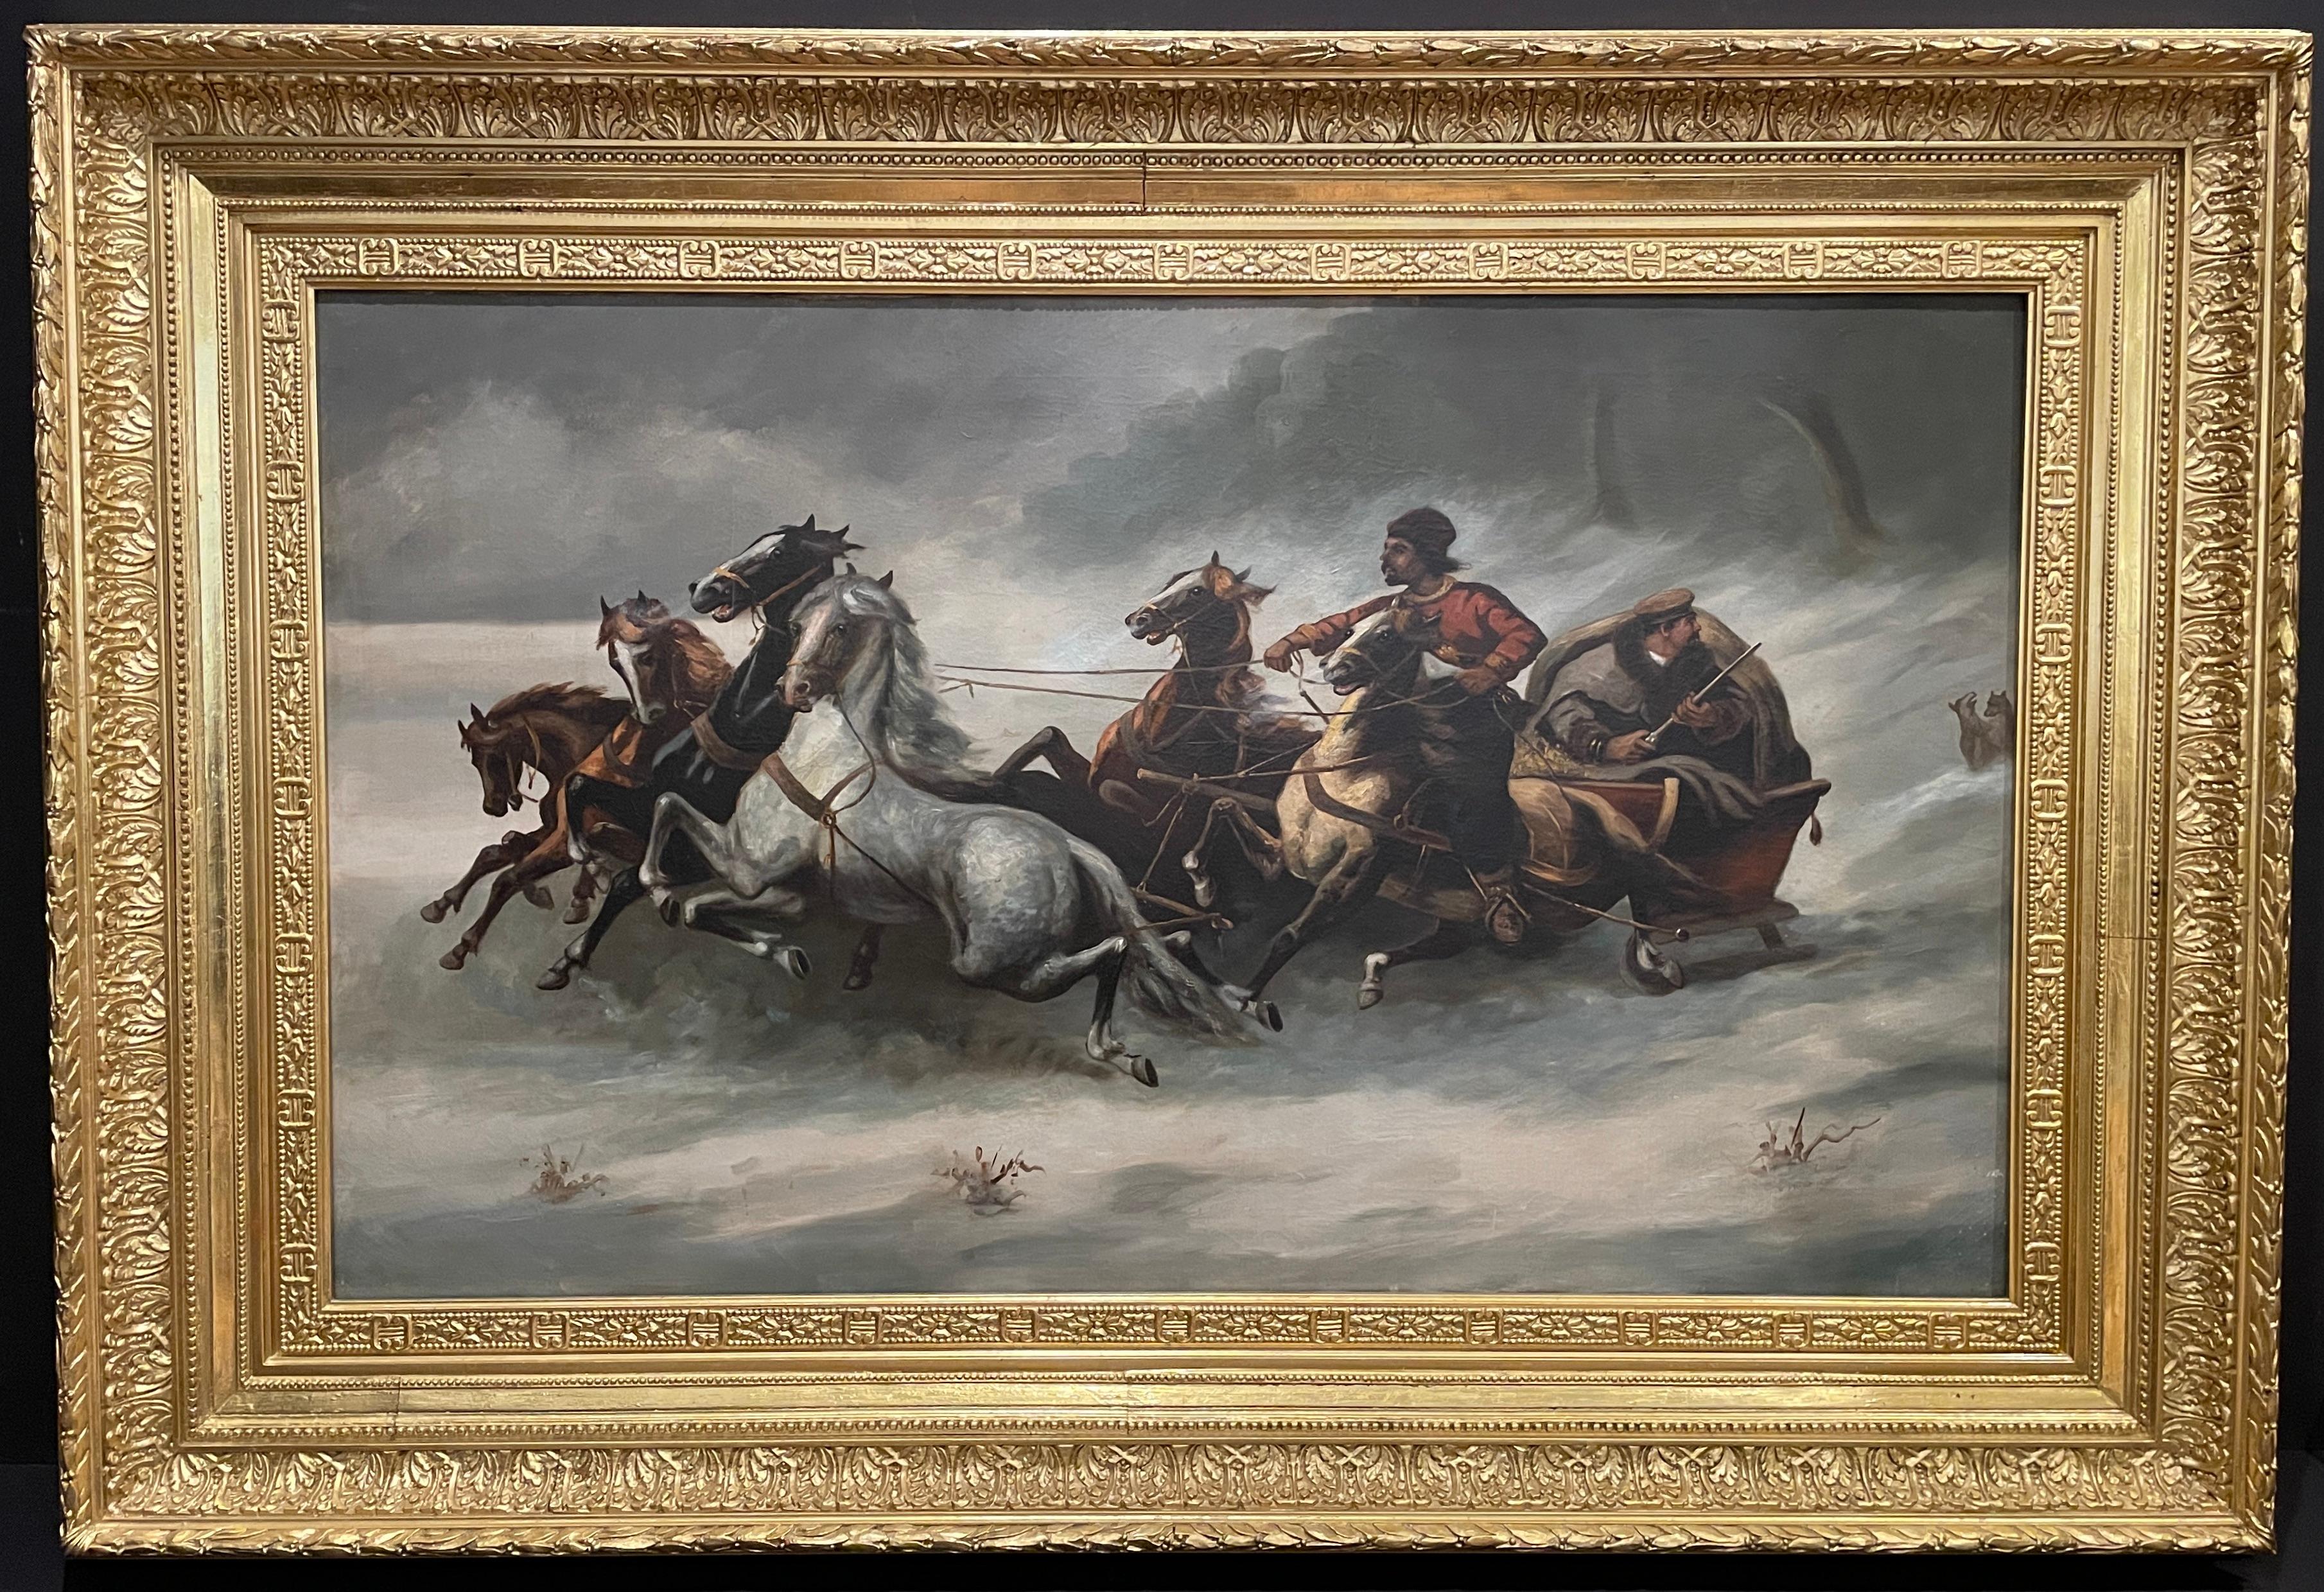 Impressive well painted 19th century Russian oil on canvas of hunt scene or chase featuring troika pulled by 6 horses in full stride. Man armed with rifle seated in the vehicle while another controls the team of horses. Hunting dogs follow close